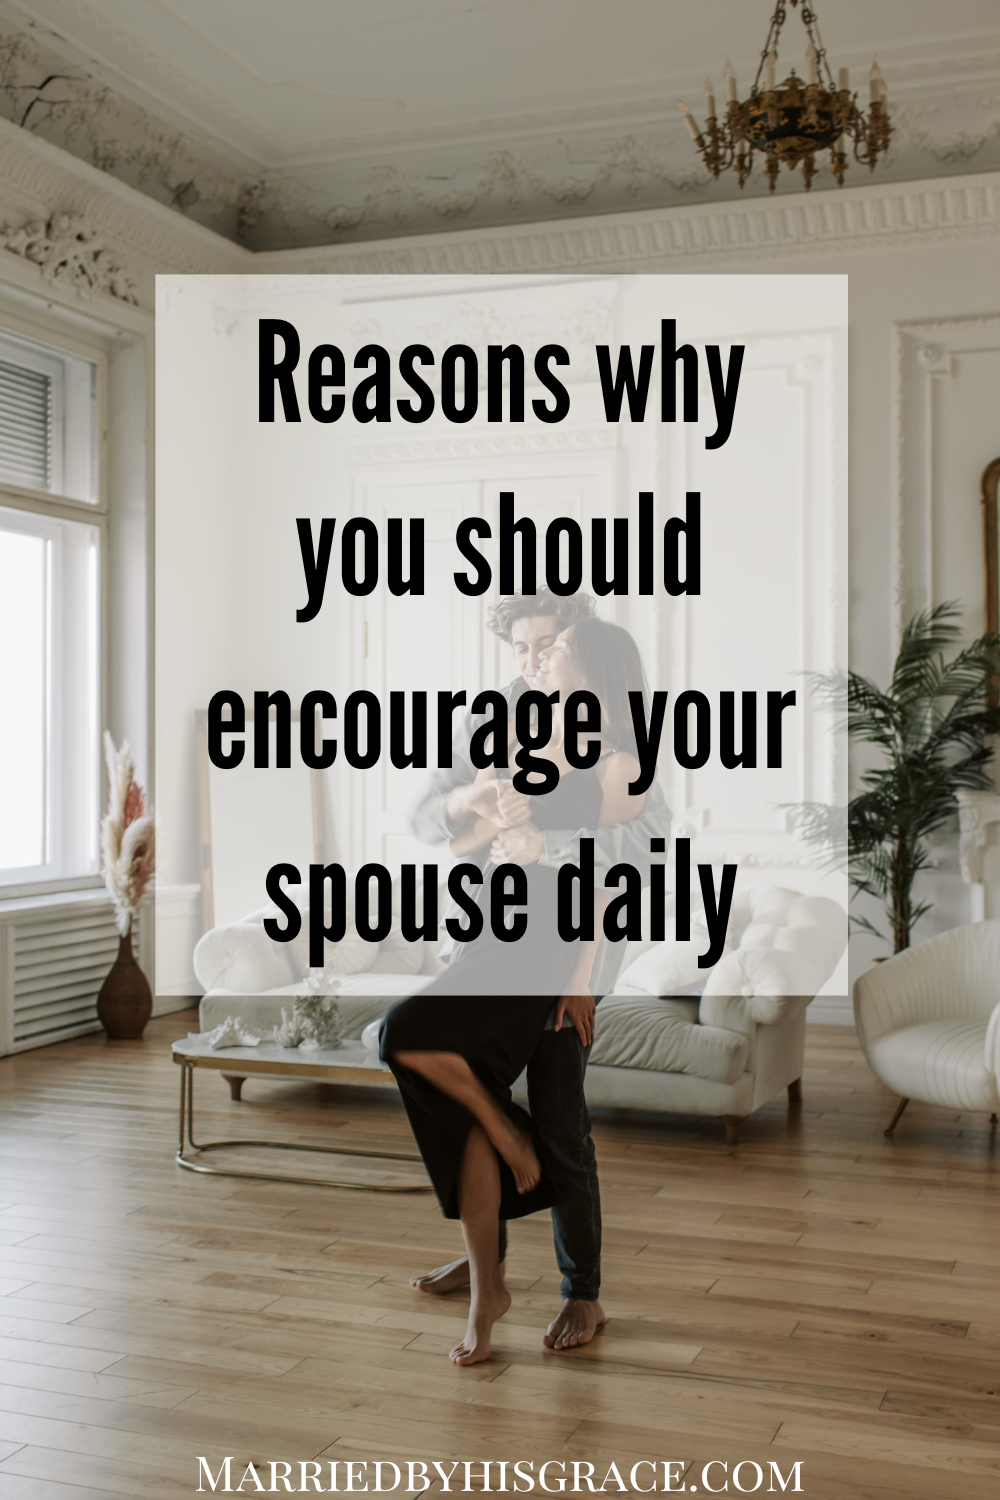 Why we should be encouraging our spouses